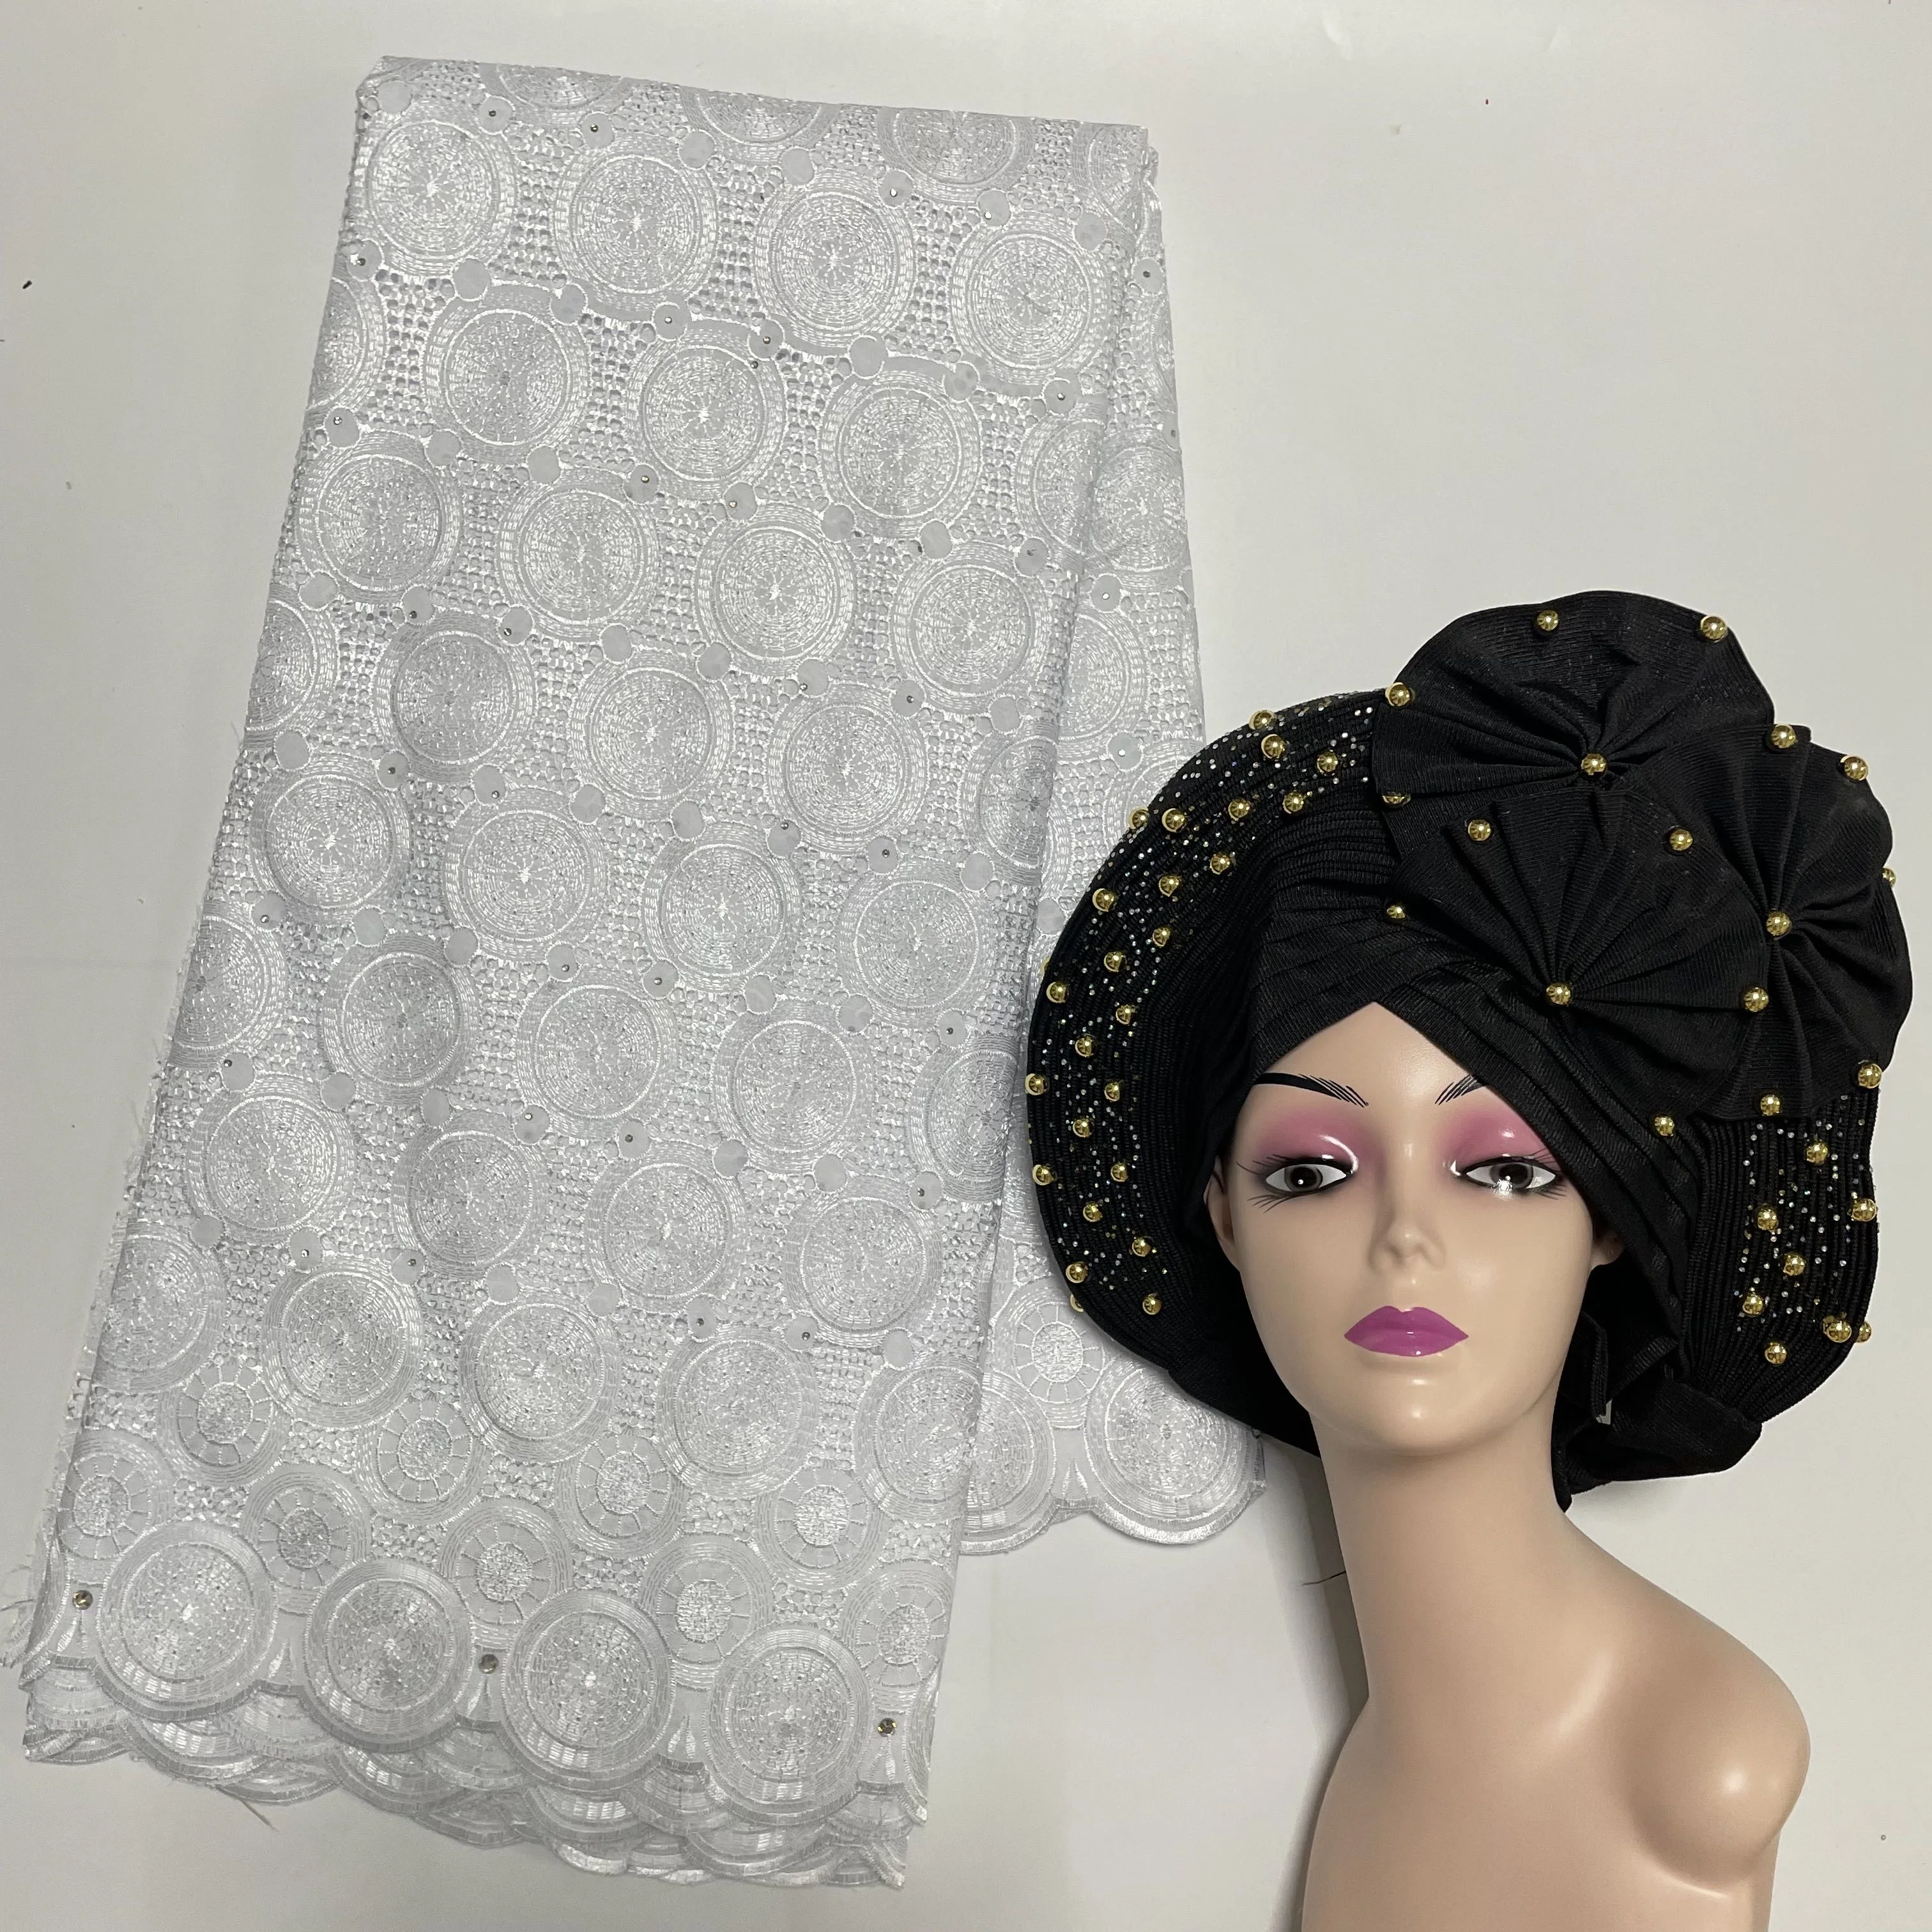 

2024 African Swiss Embroidery Cotton Lace Fabrics 5Yards Matching With Nigerian Aso Oke Auto Gele Headtie Hair Tie Scarfs Caps